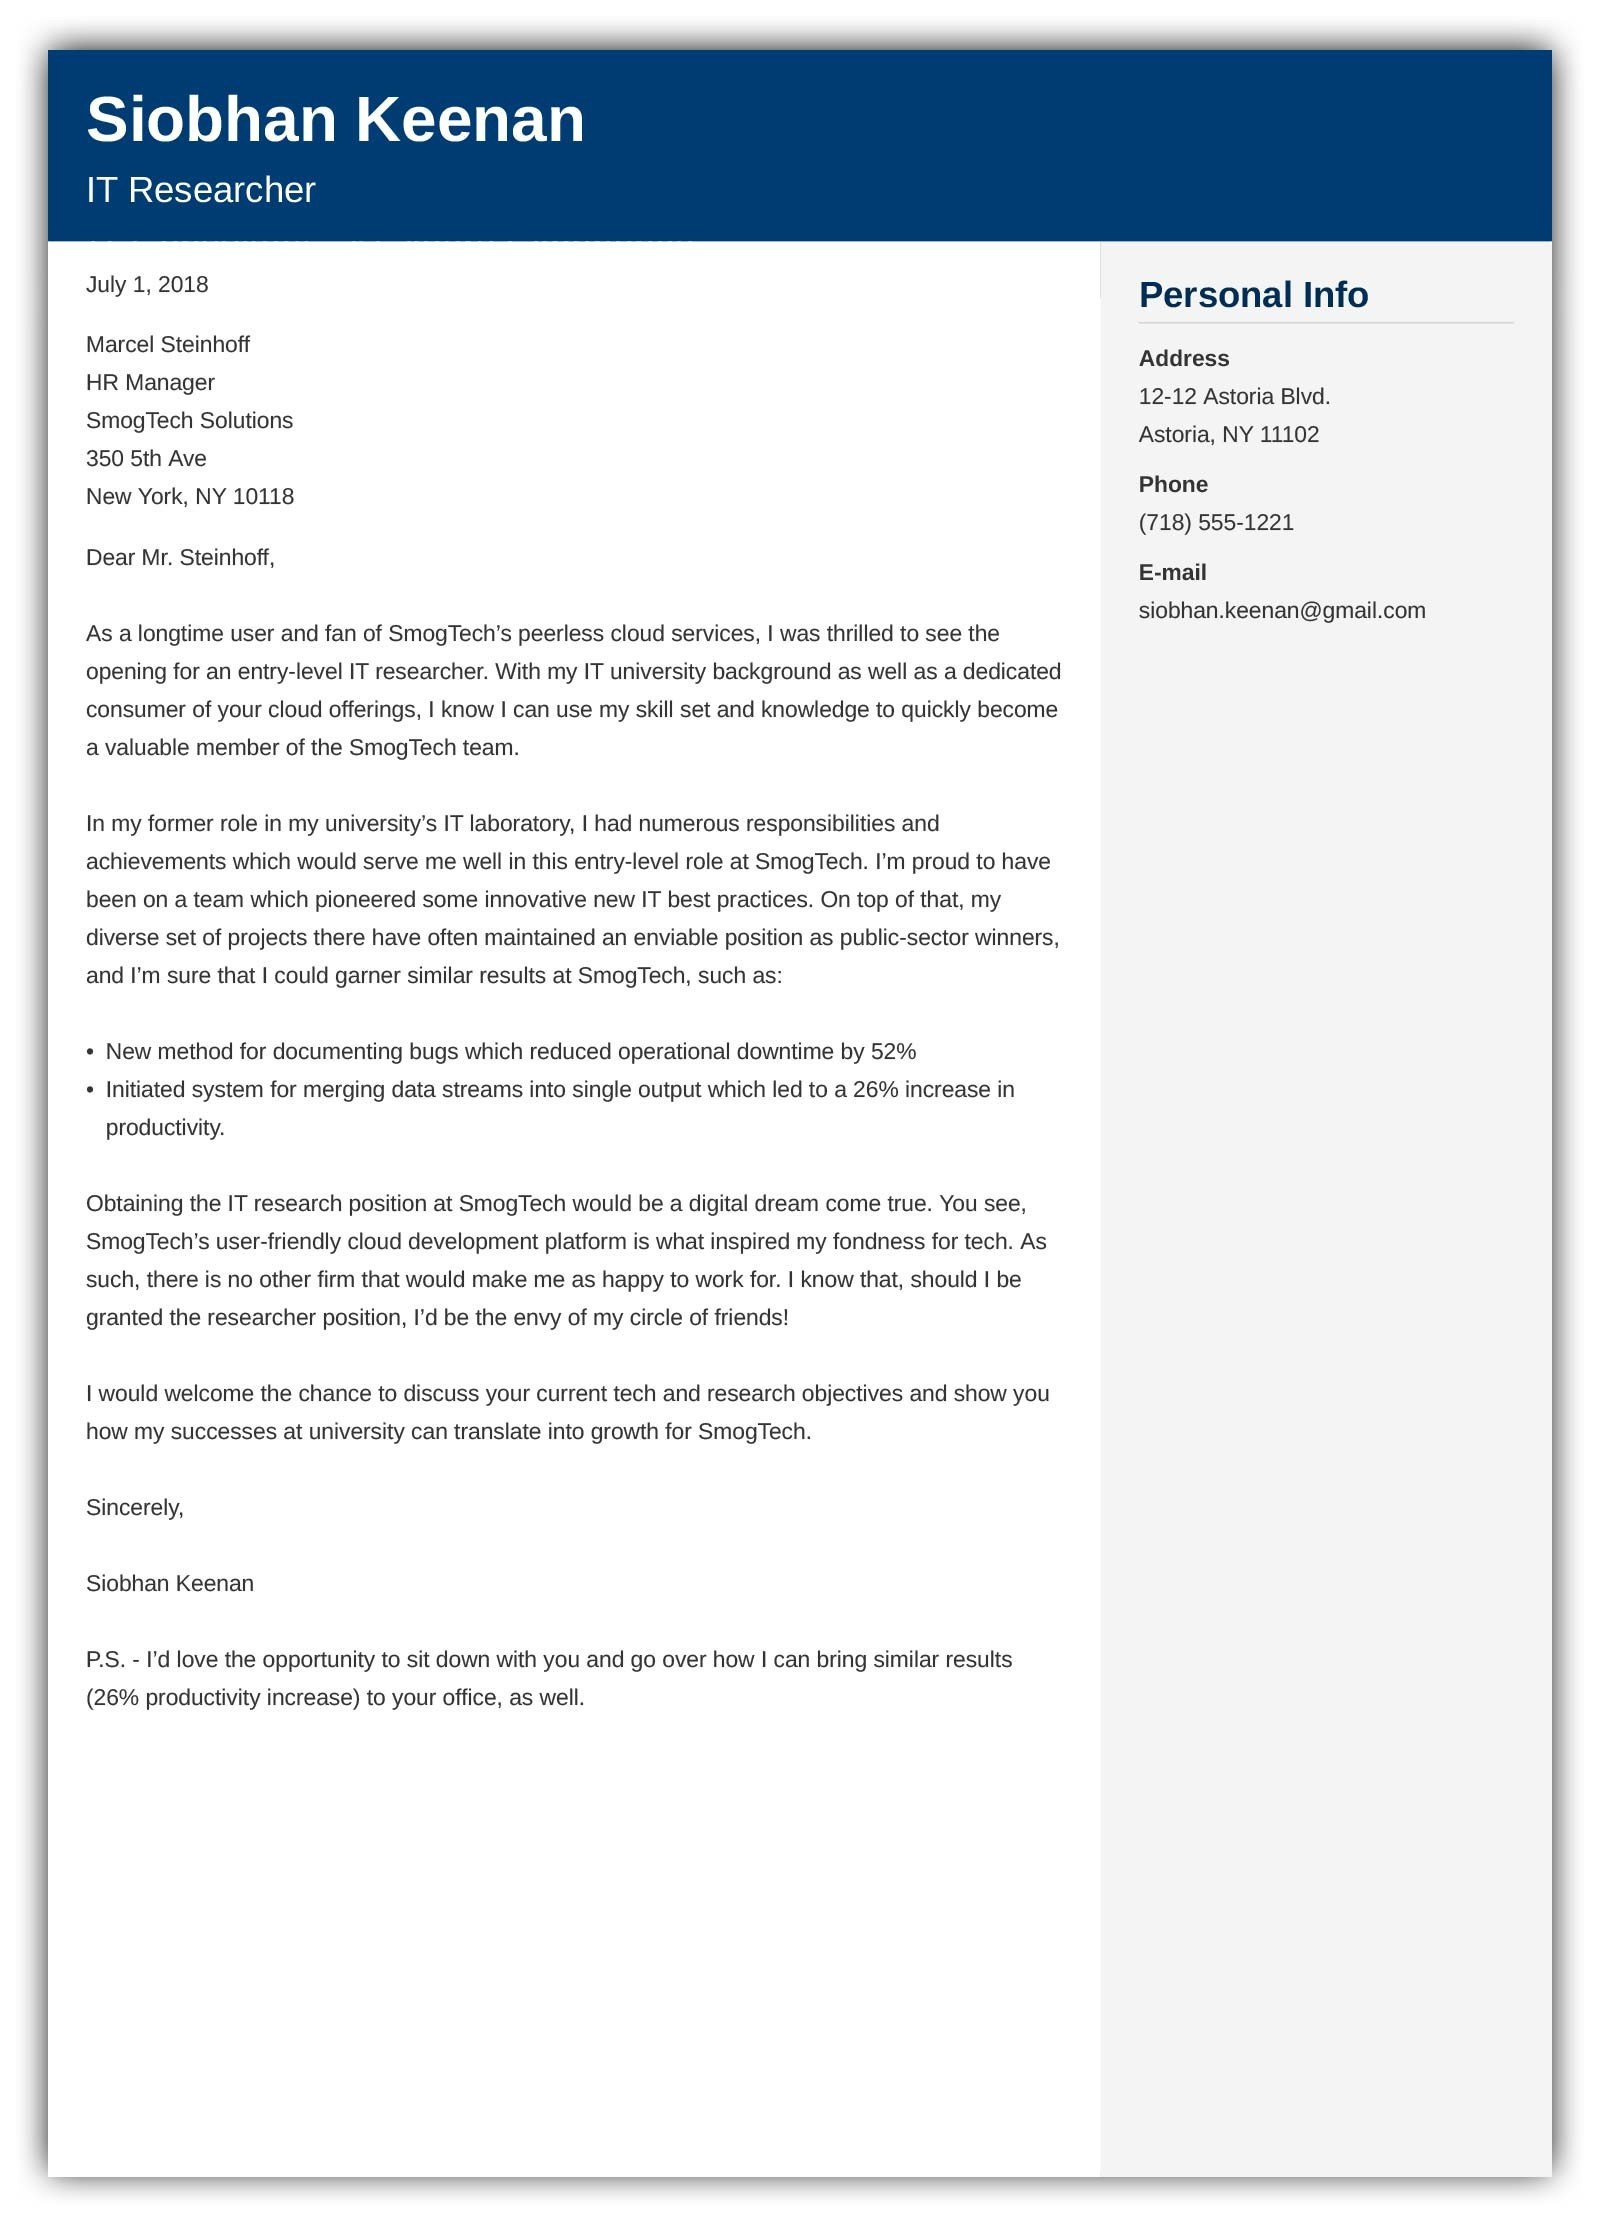 Application Letter With No Experience : Job Application Cover Letter With No Experience | Contract ...